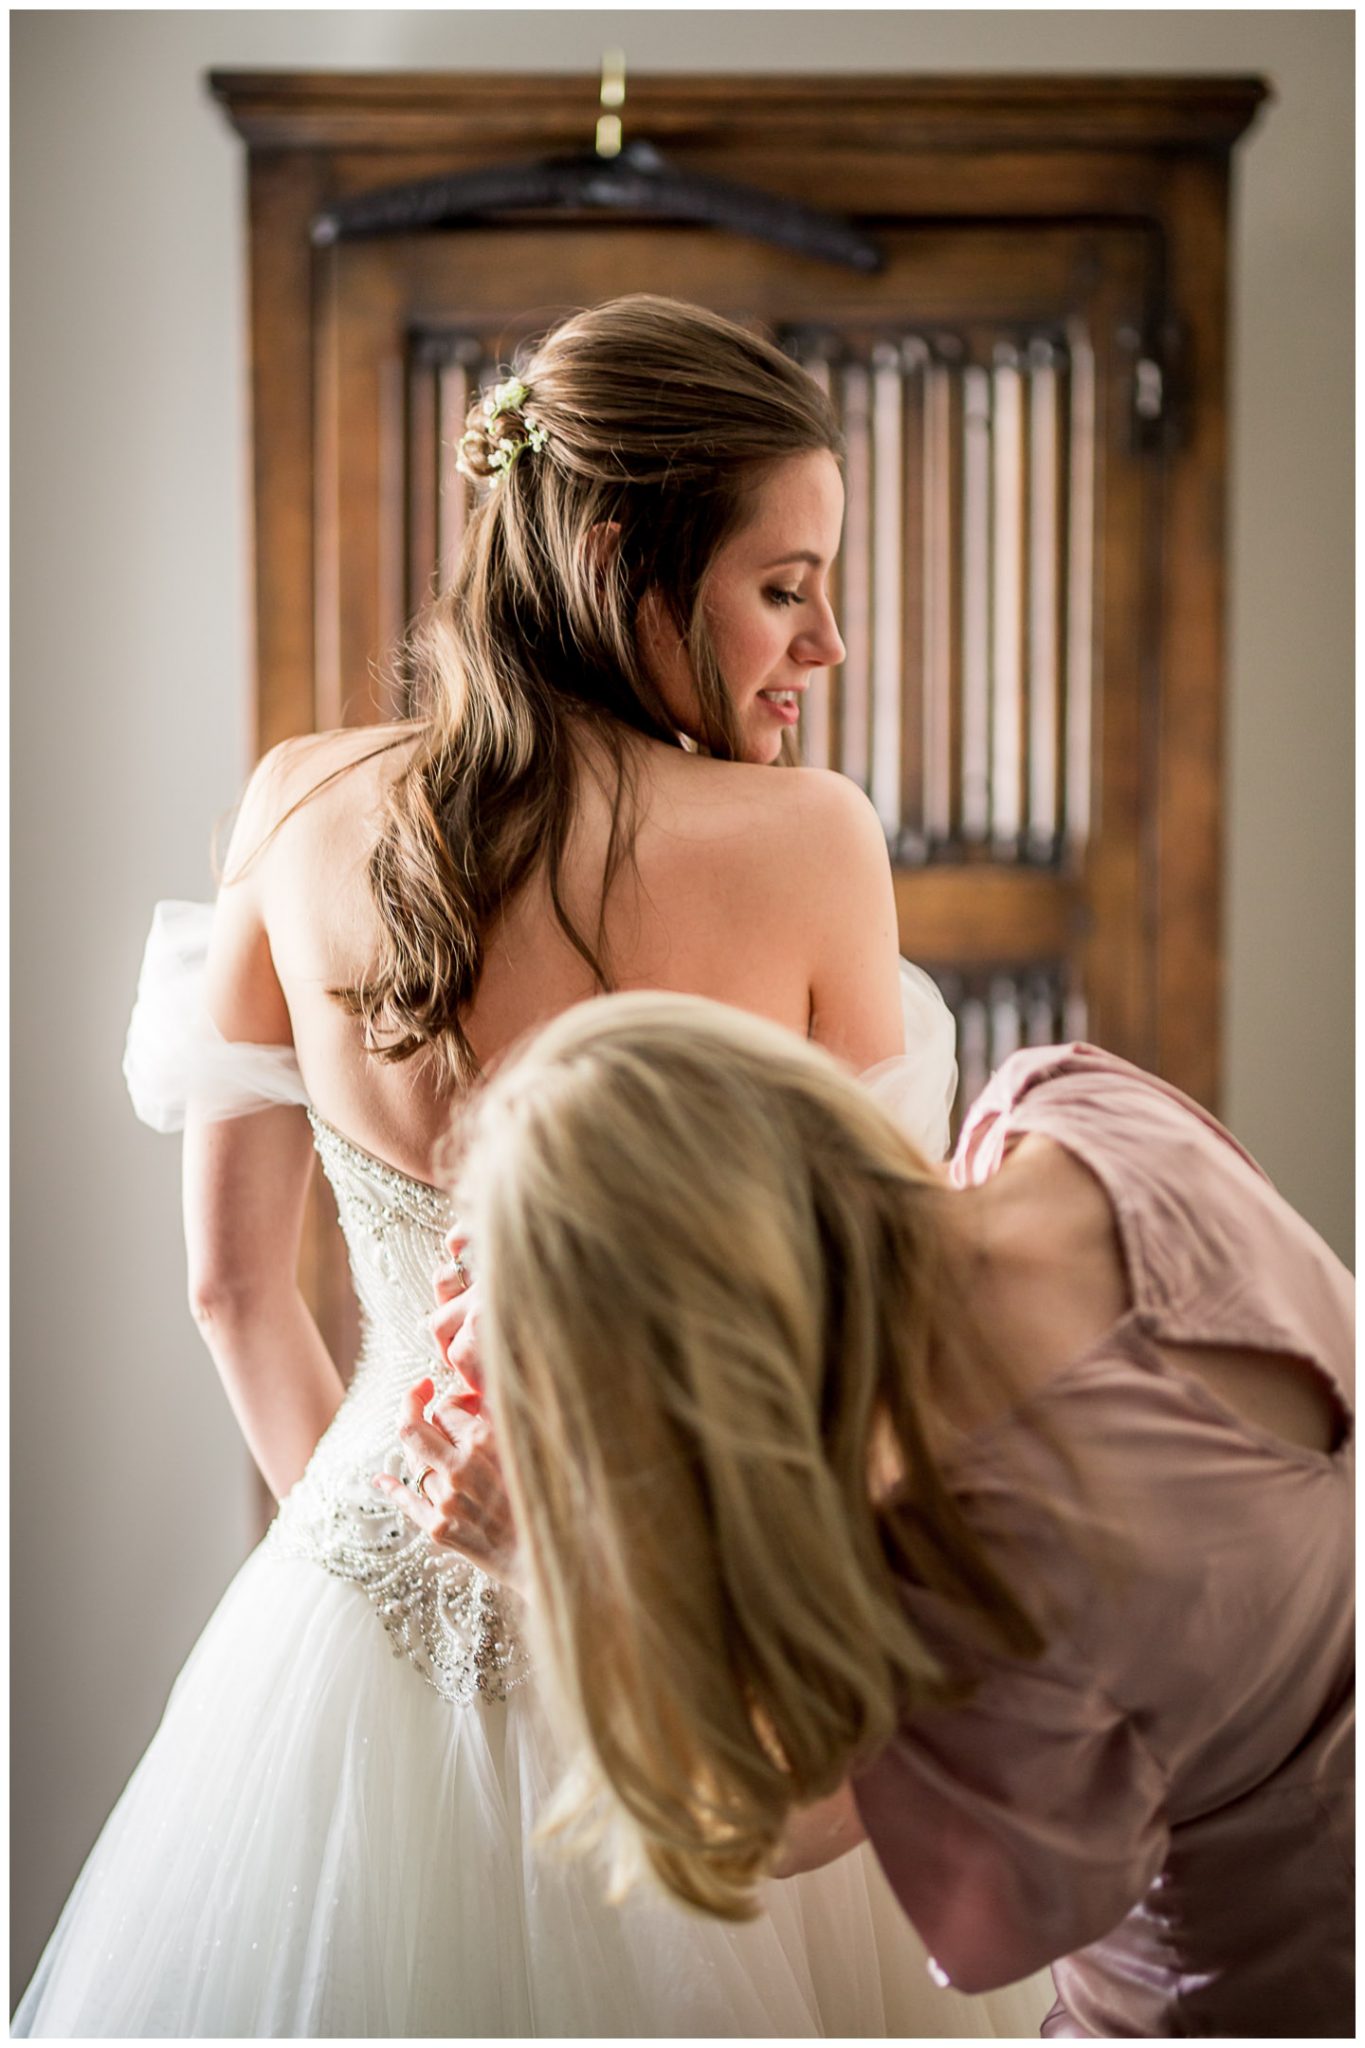 The bride is buttoned into her wedding dress